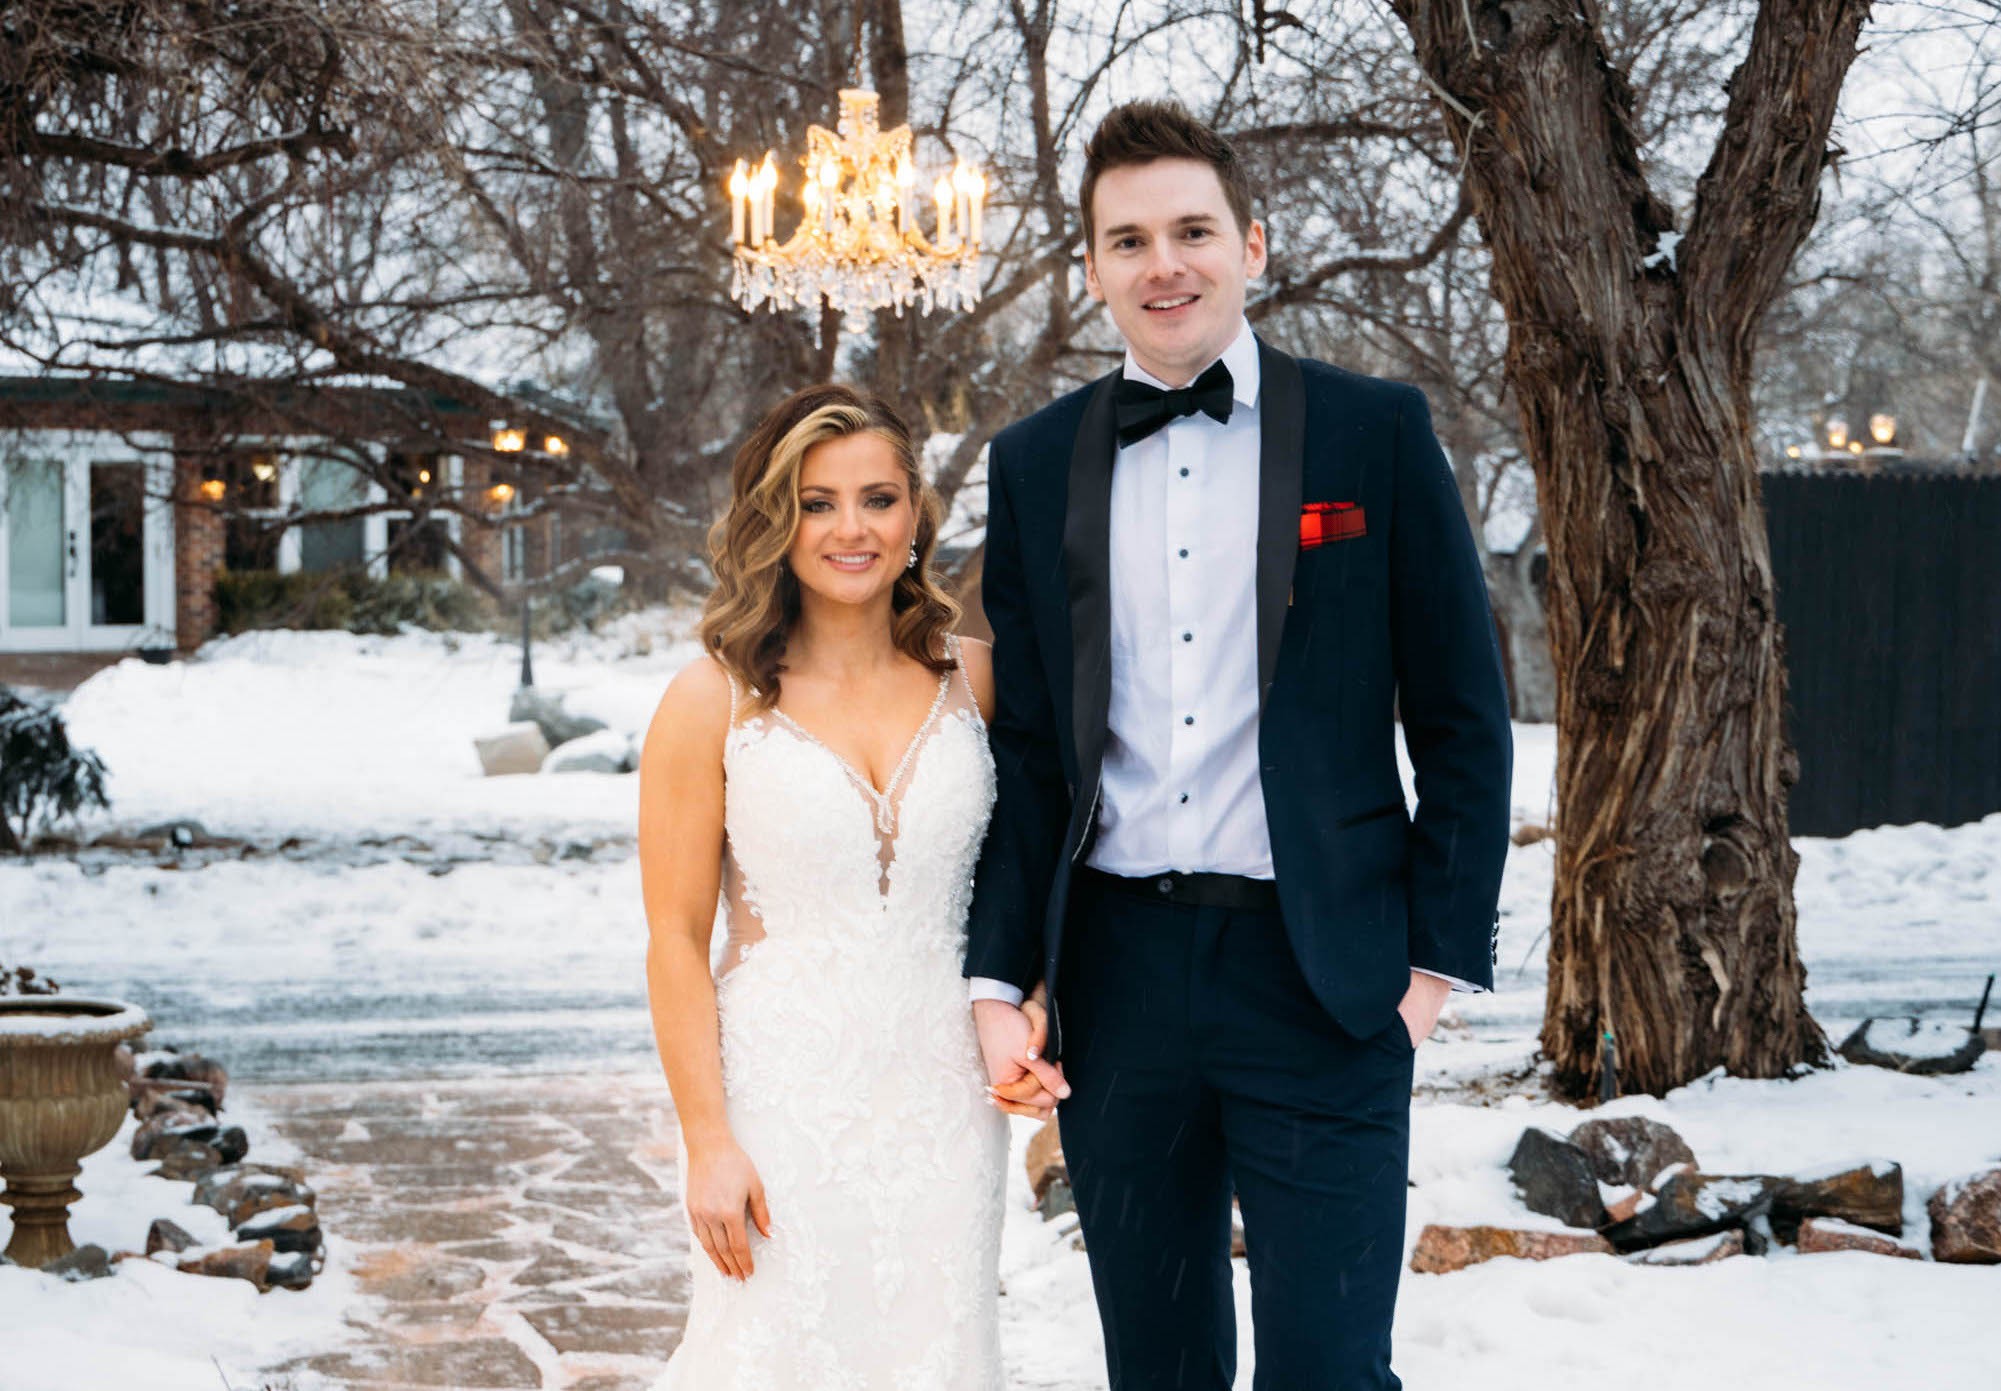 Michael and Chloe Tie the Knot in Married at First Sight Denver